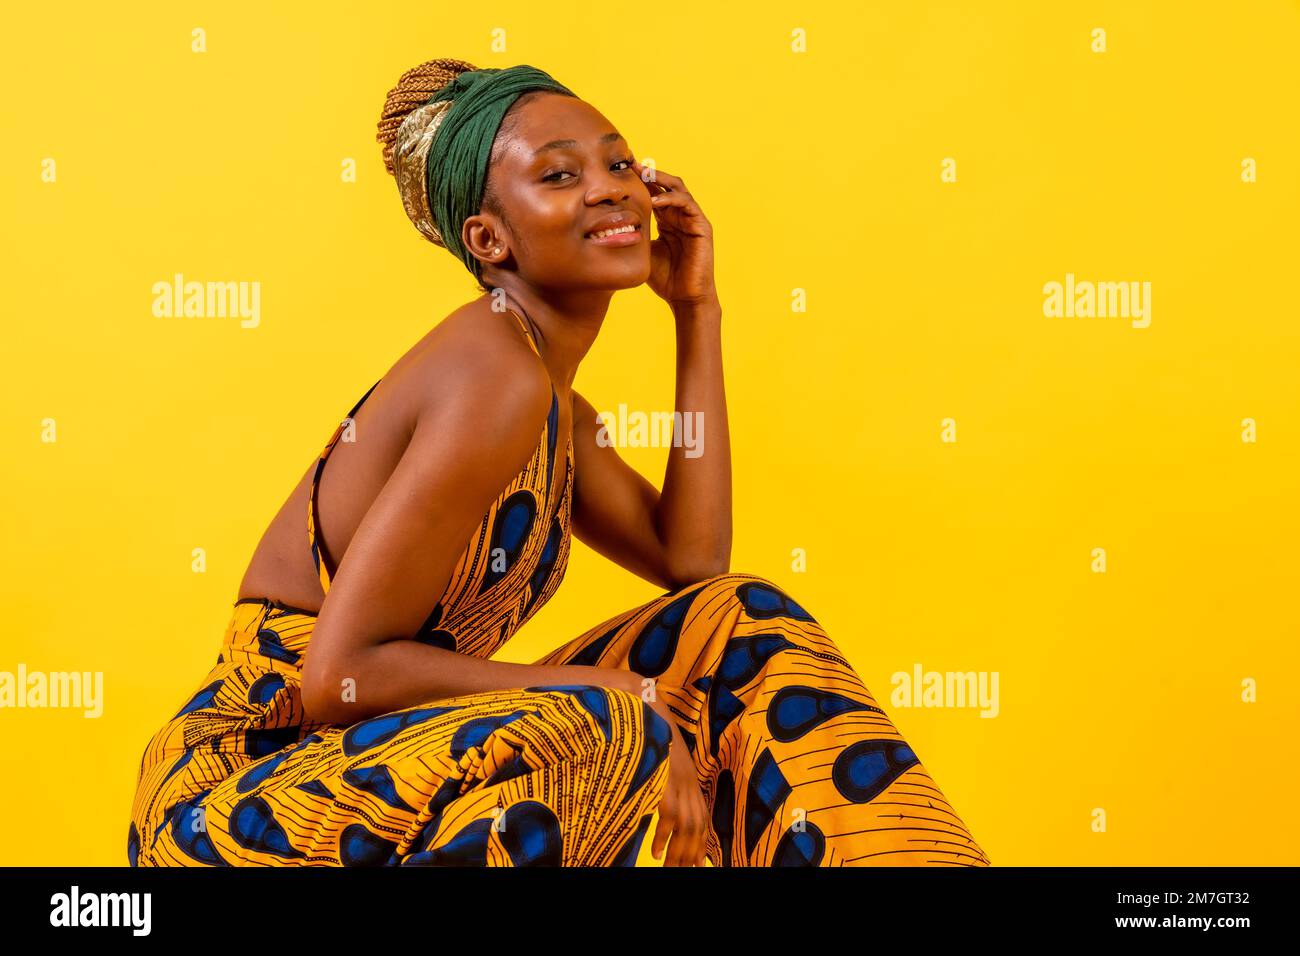 One person woman of black ethnicity with traditional costume on yellow background, sitting smiling Stock Photo